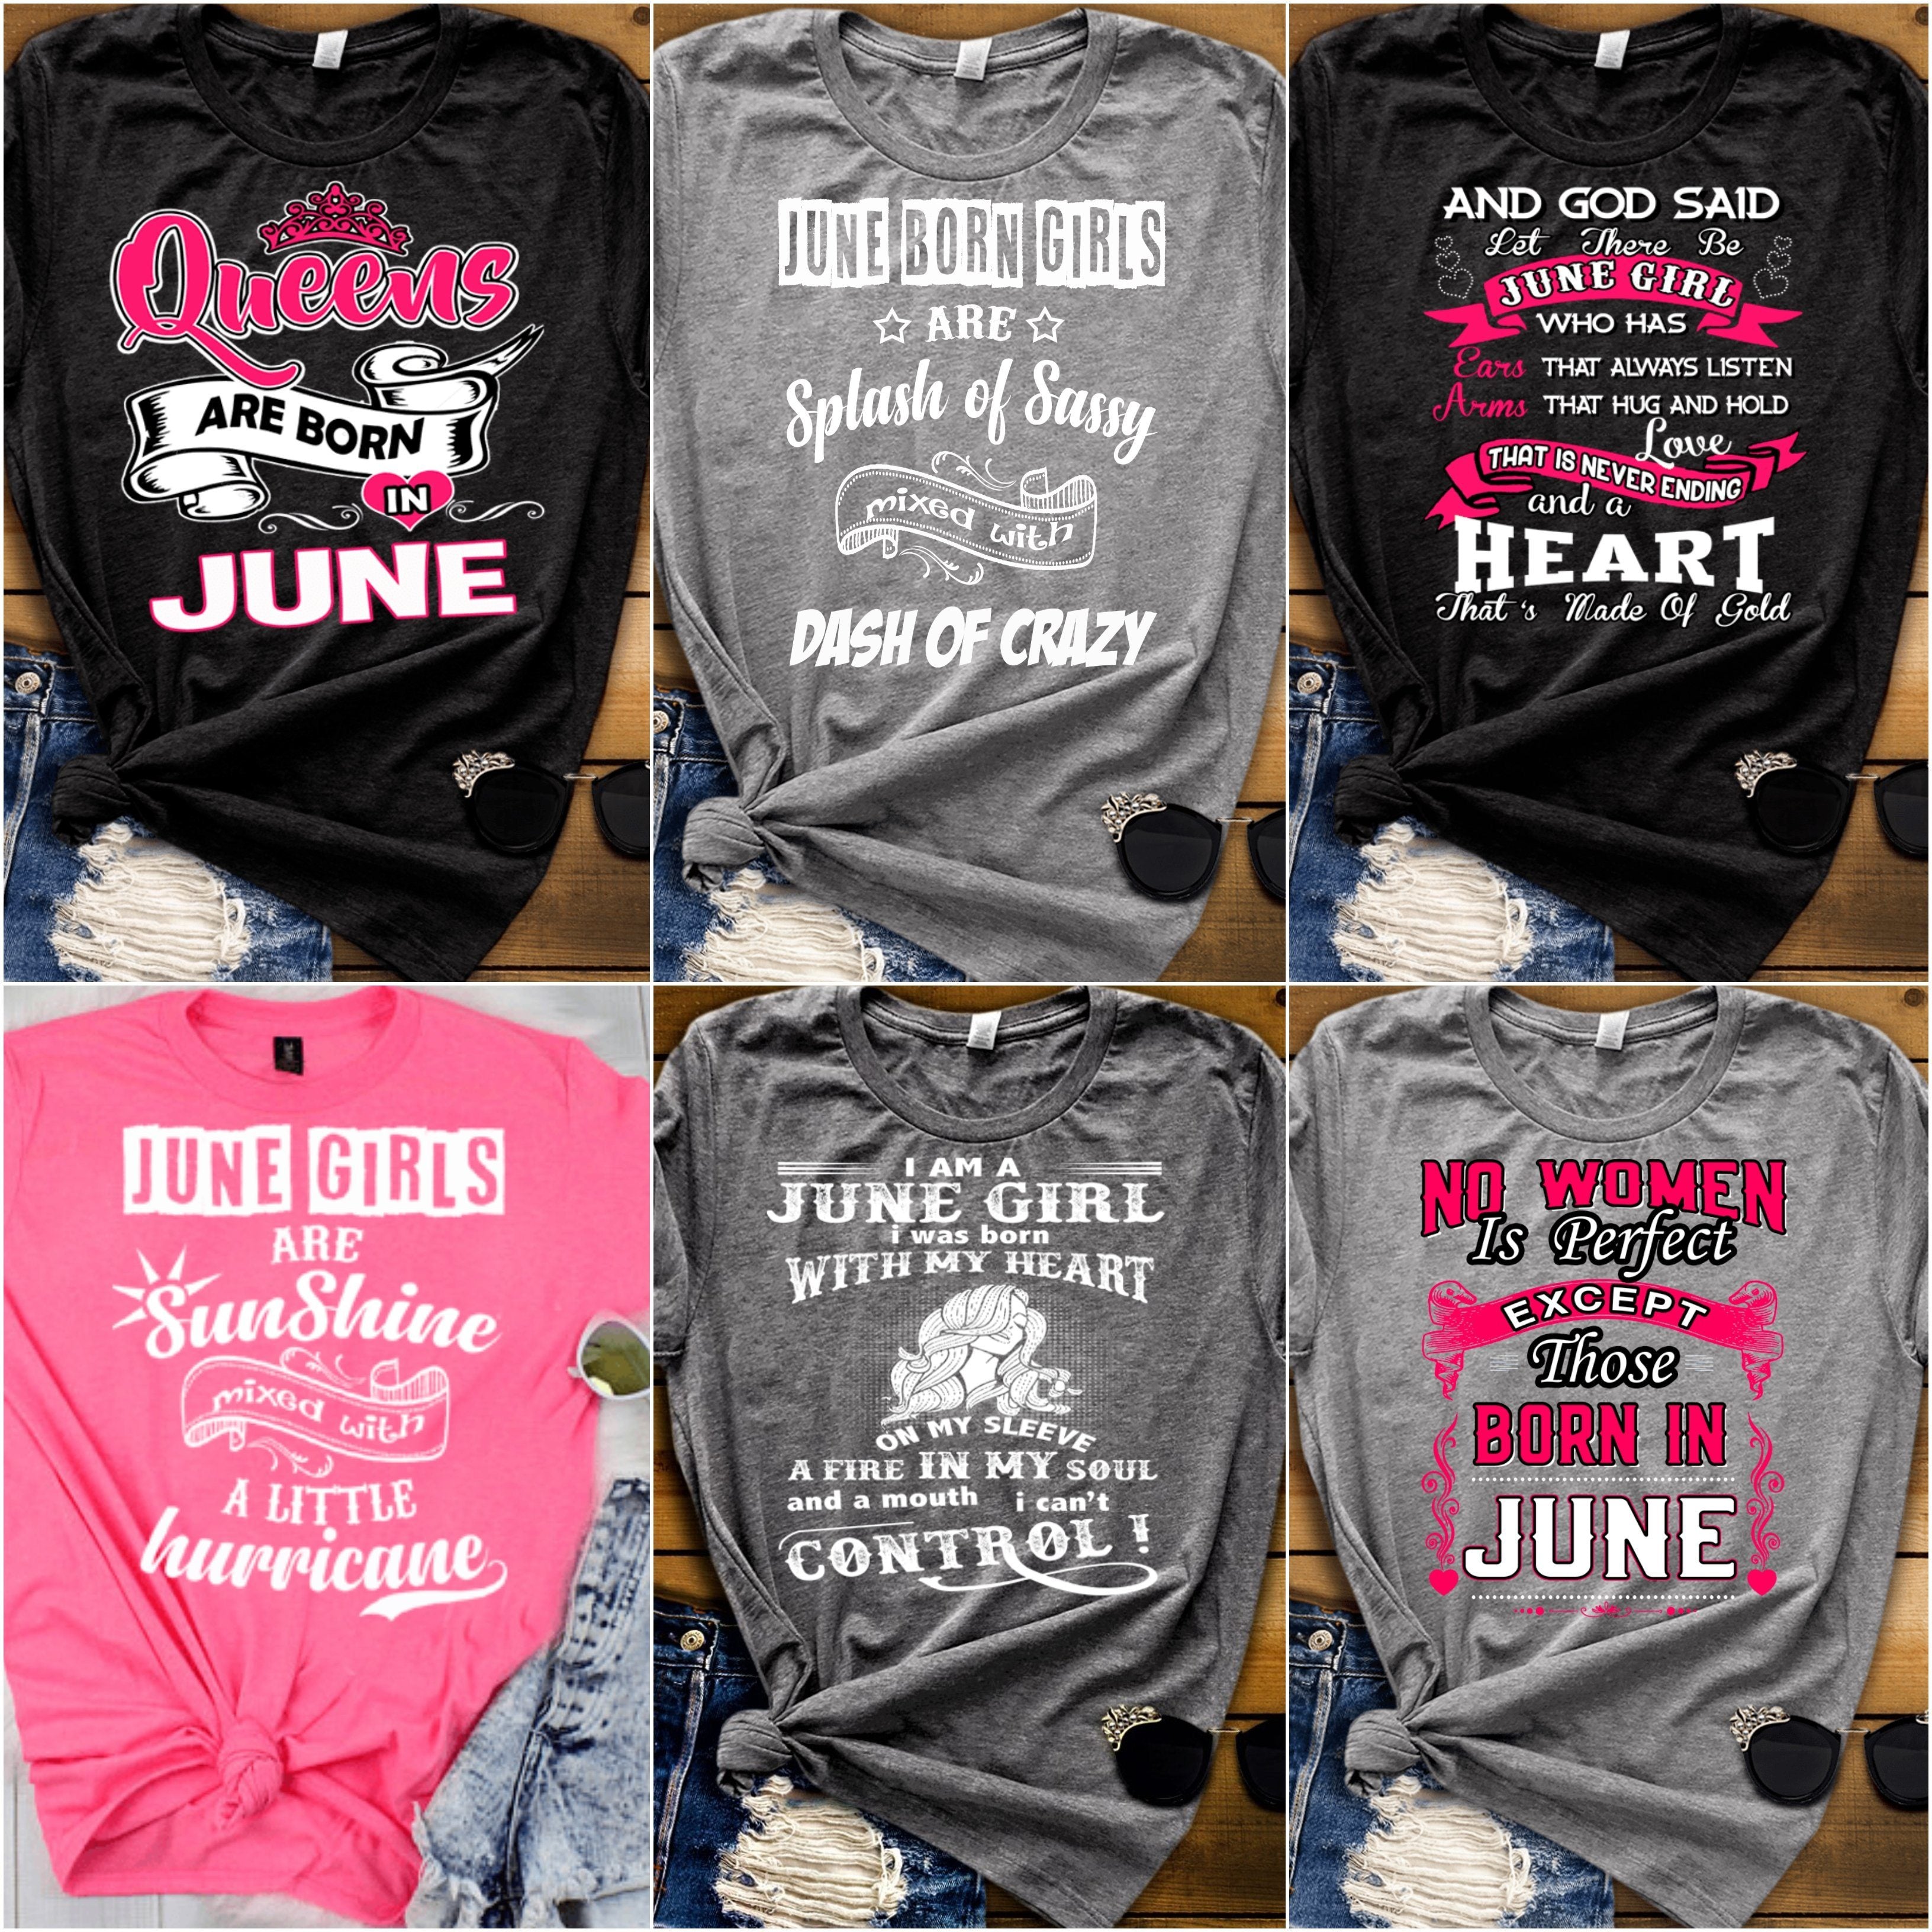 "Good Birthday Vibes For June Born Girls" Pack Of 6 Shirts